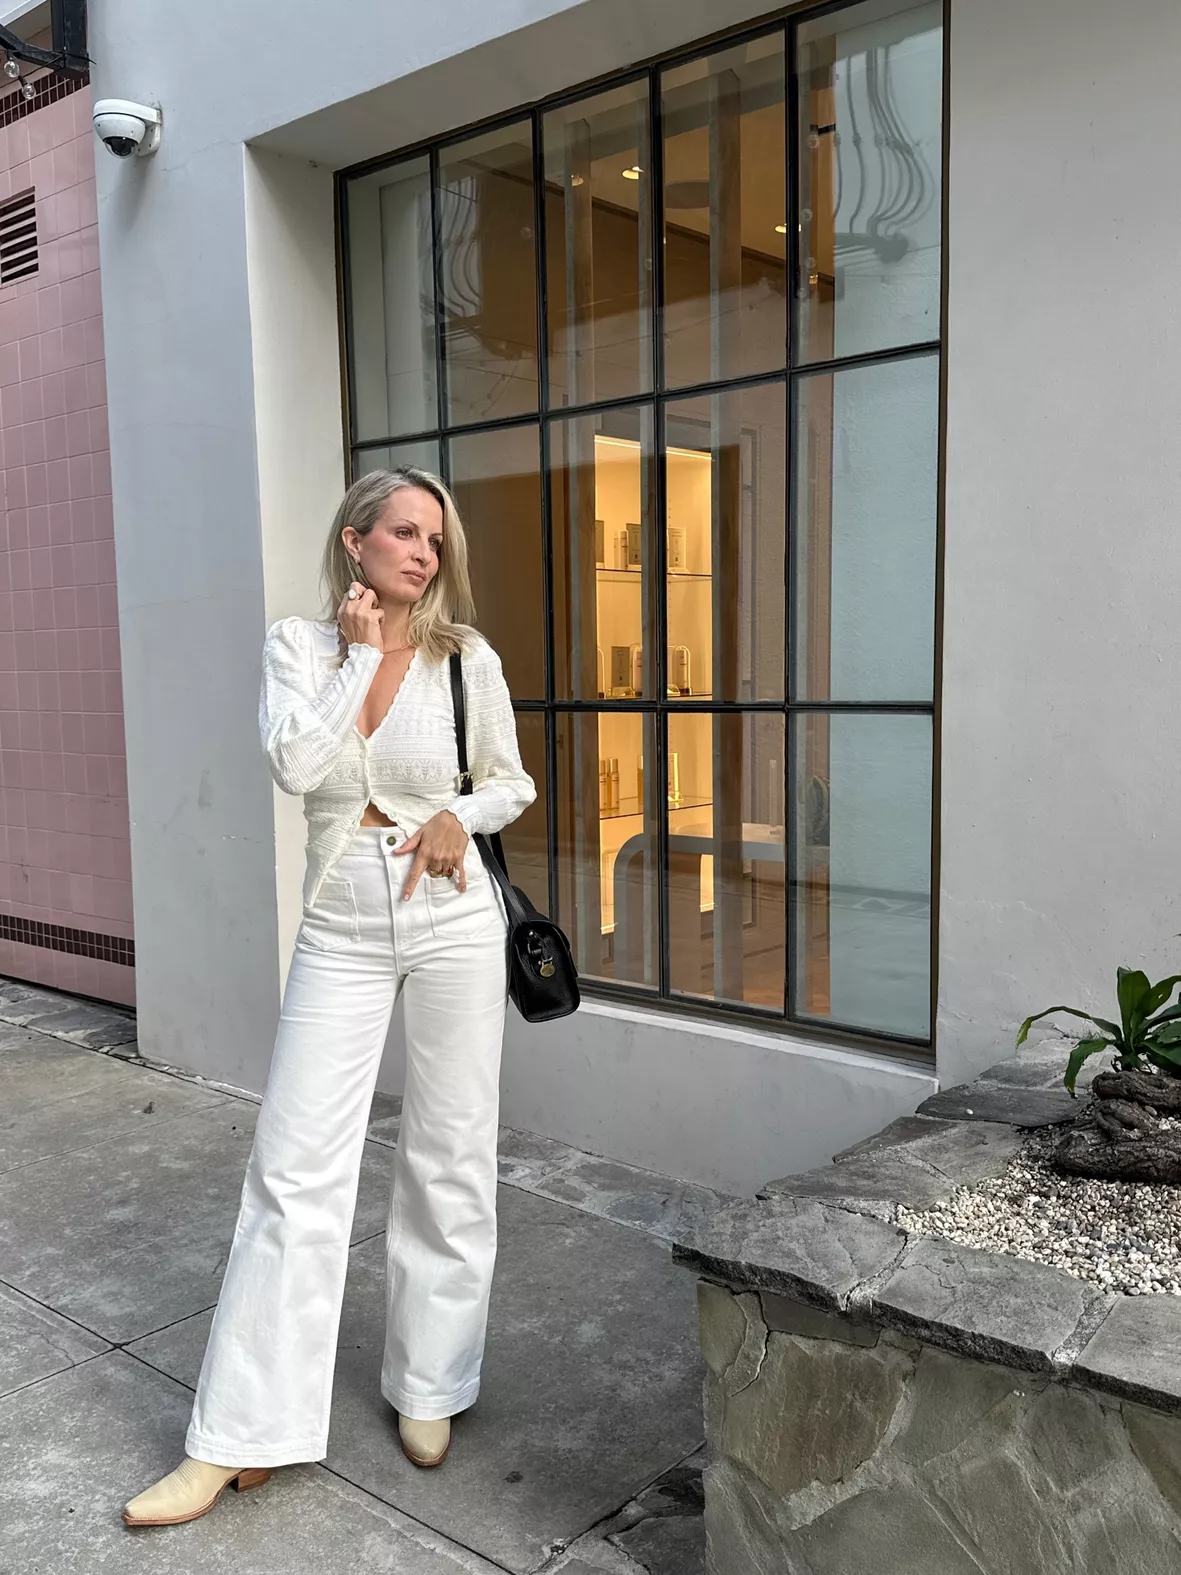 6 Best Ways To Style WHITE Pants in Fall